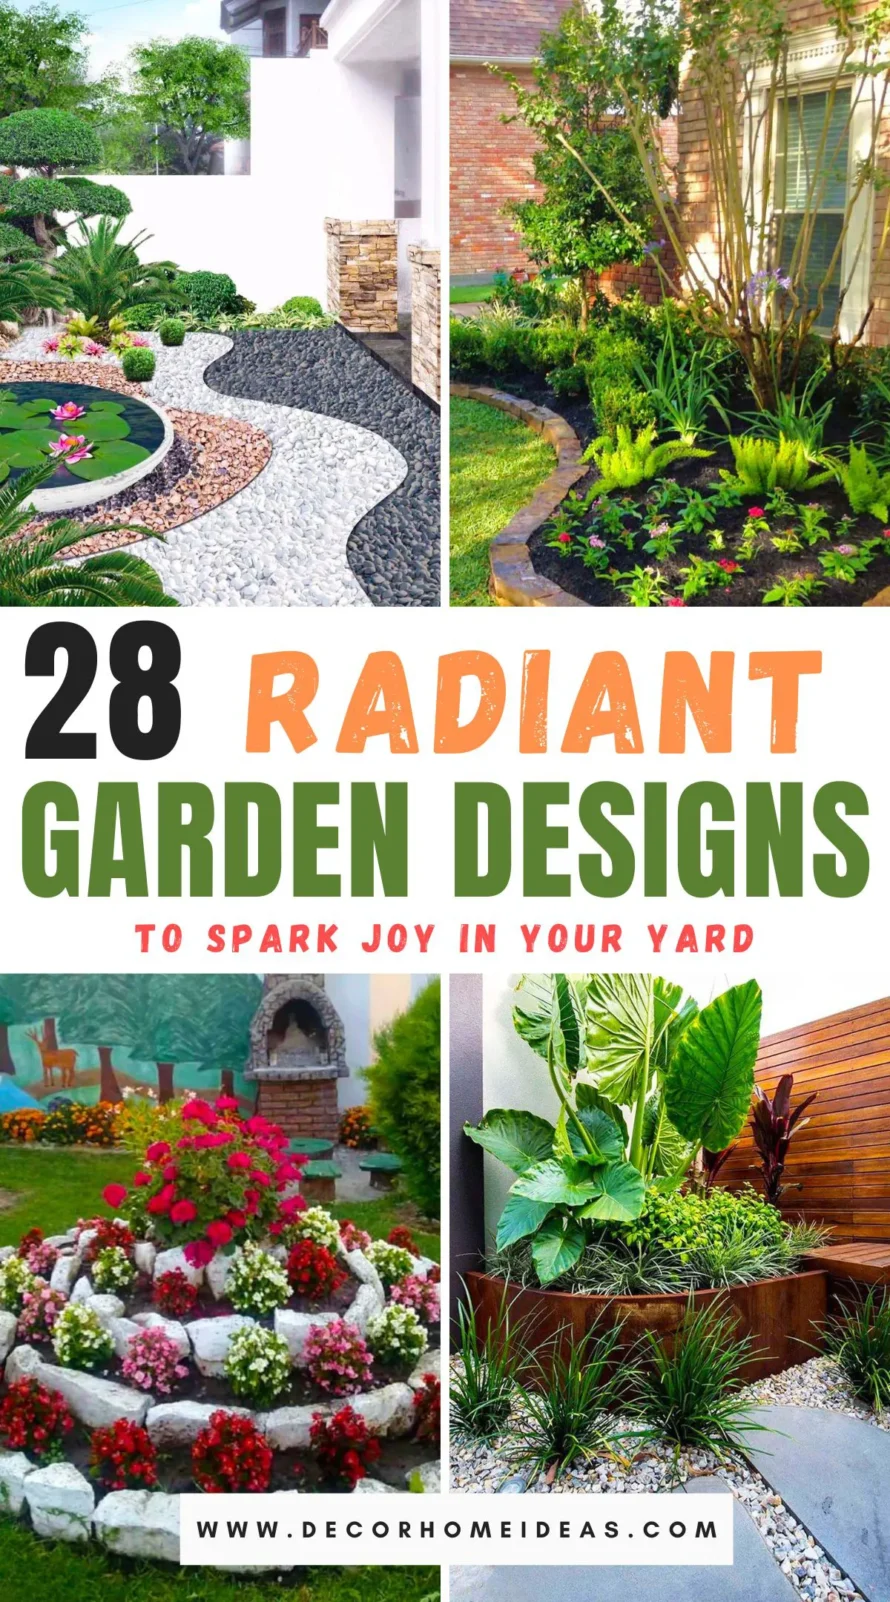 Explore 28 radiant garden designs that promise to bring joy and vibrant color to your yard. Whether you have a small patch or a vast lawn, these creative ideas are tailored to make your outdoor space shine. 